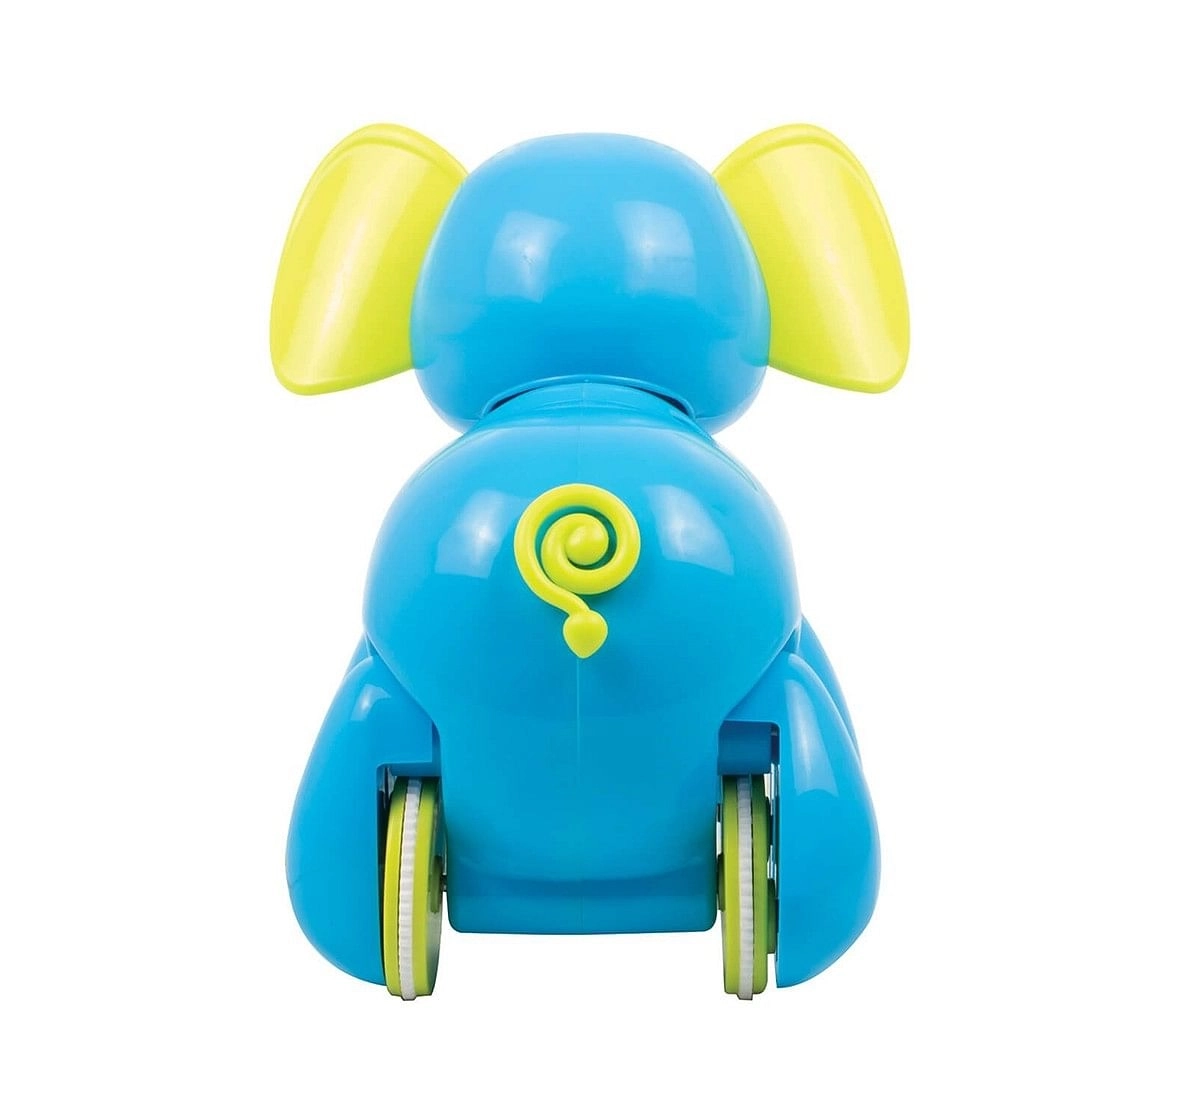  Giggles Alphy The Elephant Early Learner Toys for Kids age 12M+ (Blue)